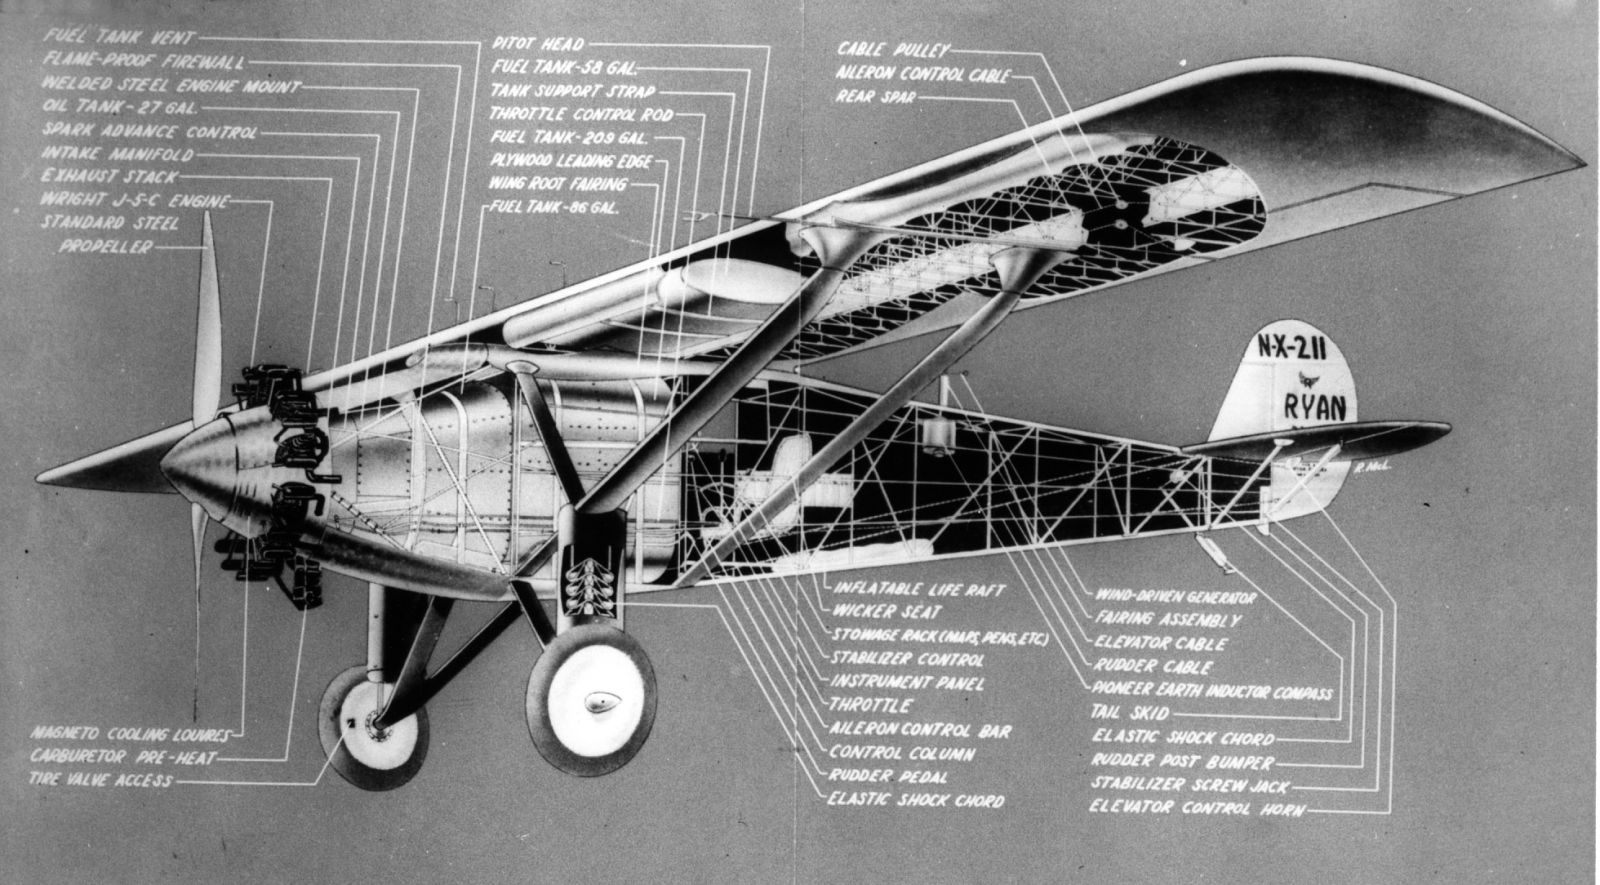 A cutaway drawing of the Spirit of St. Louis showing the huge fuel tank in the front of the cockpit, as well as the fuel tanks in the wings. (National Air and Space Museum)